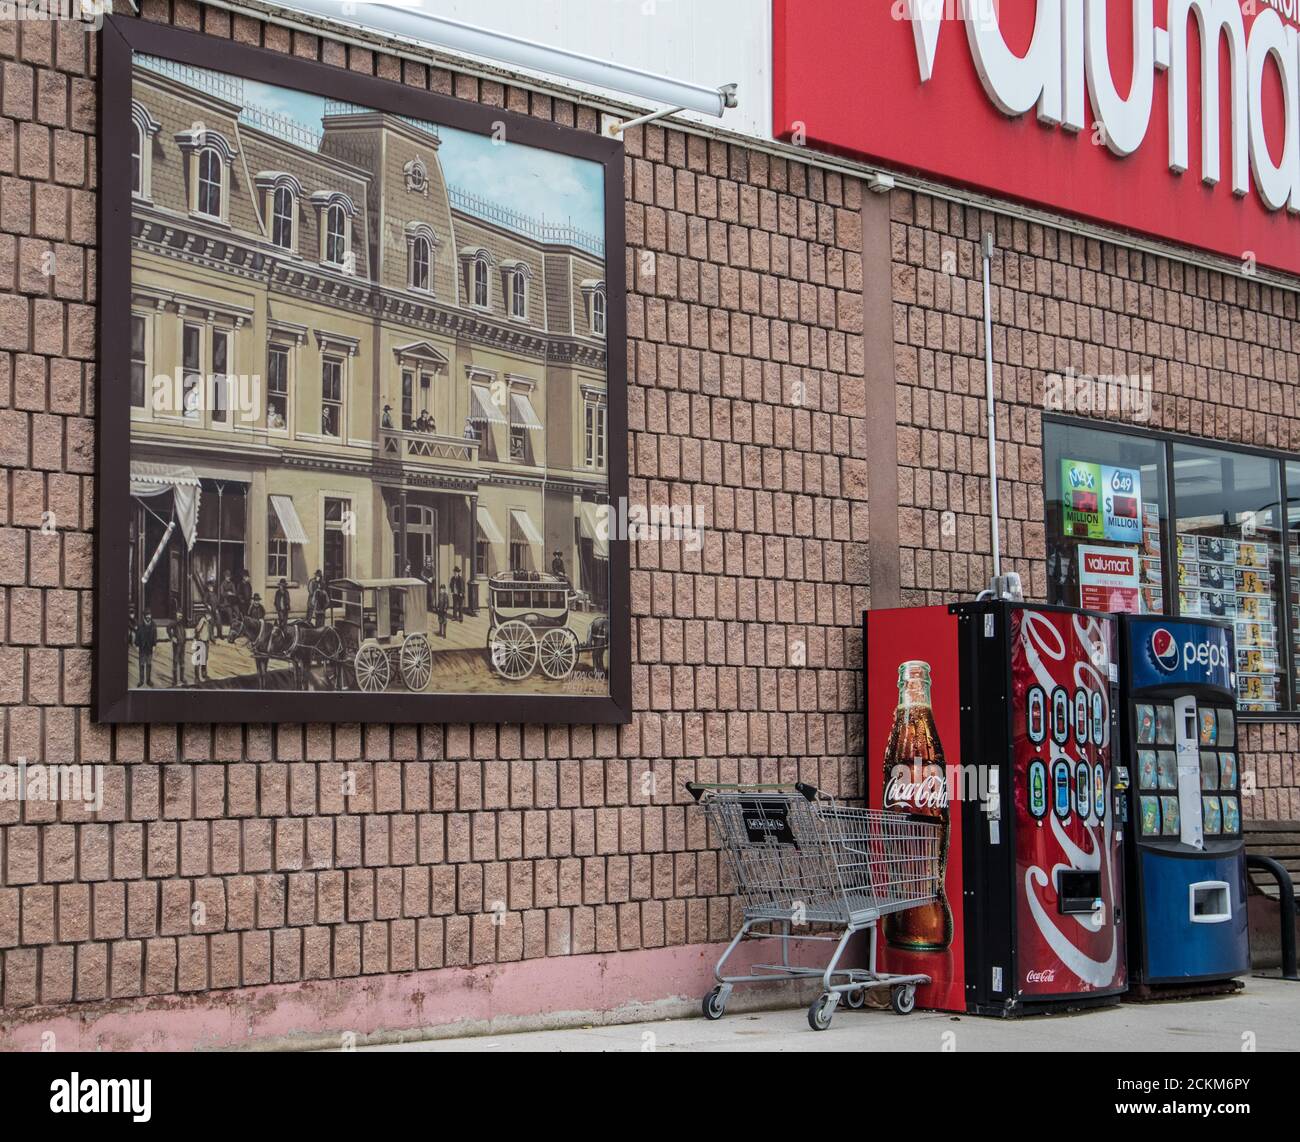 A painting representing an old building, permanently displayed on the wall of the Valu-Mart, next to some soda dispensers and a cart.. Stock Photo